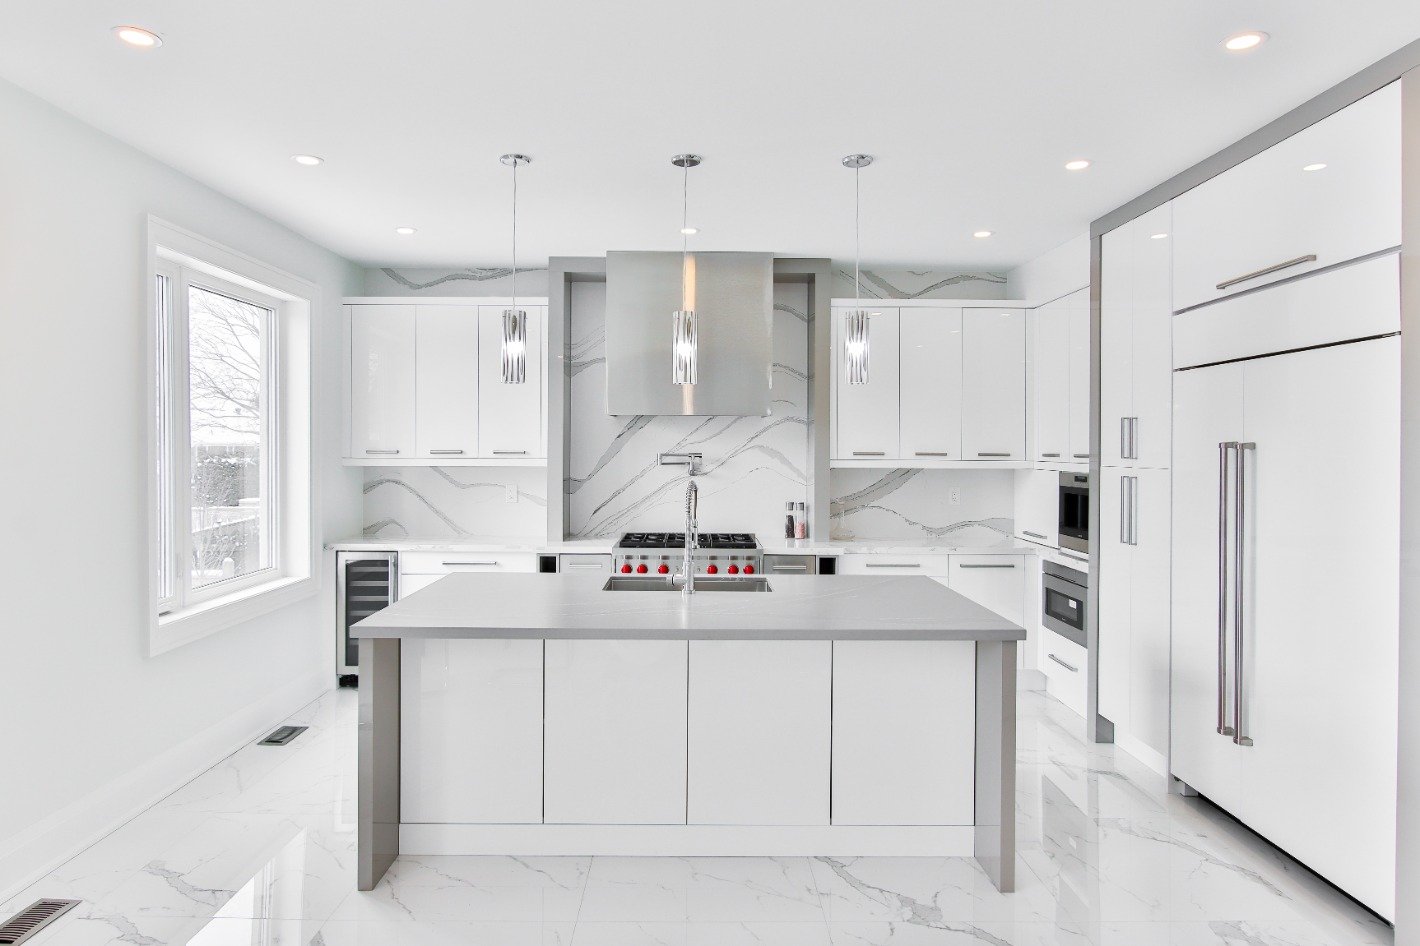 Bright white modern kitchen with marble floors, sleek cabinetry, and stylish pendant lights